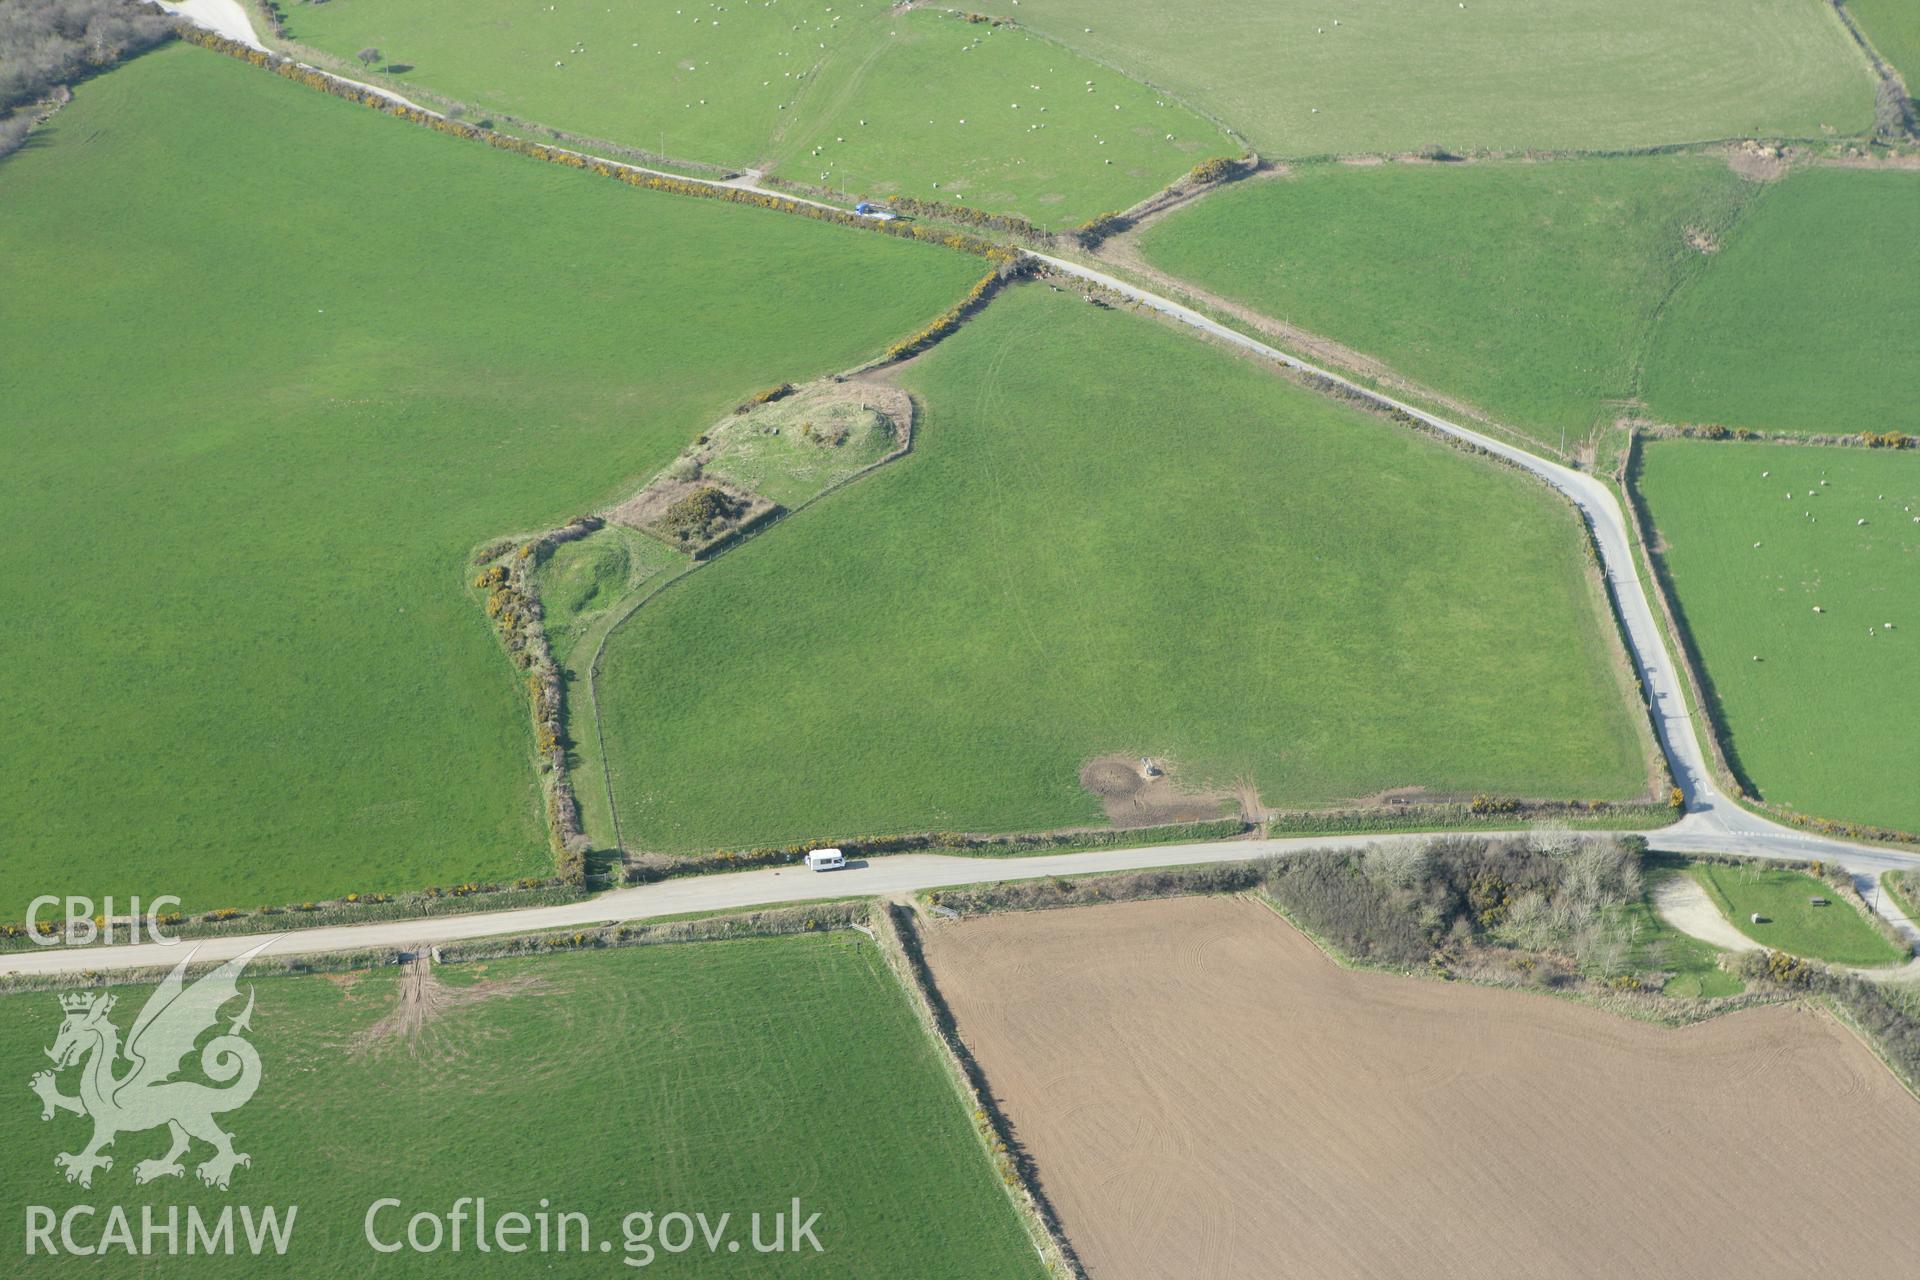 RCAHMW colour oblique aerial photograph of Crugiau Cemaes Barrow II. Taken on 13 April 2010 by Toby Driver